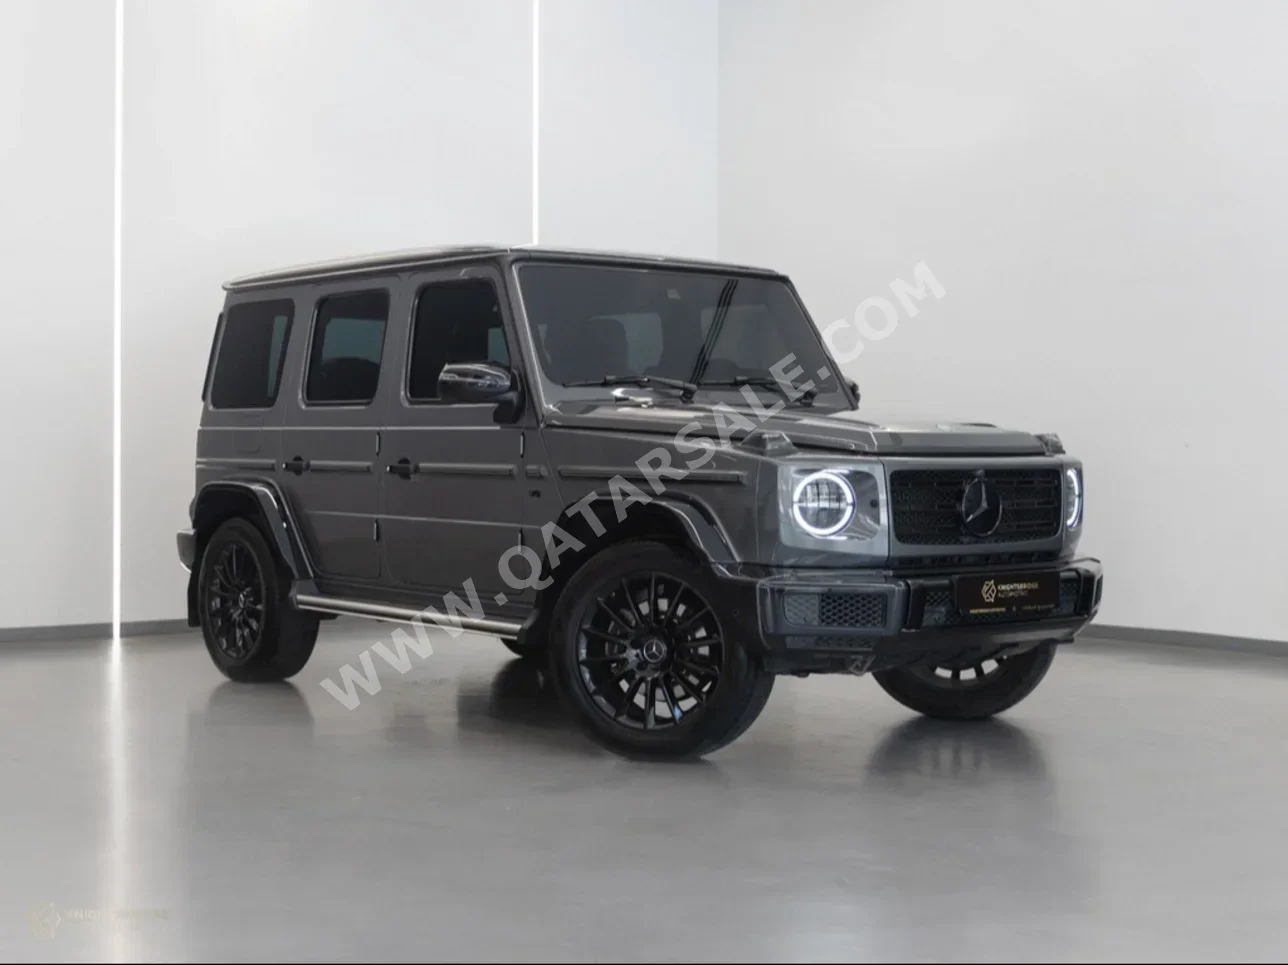 Mercedes-Benz  G-Class  500  2022  Automatic  28,400 Km  8 Cylinder  Four Wheel Drive (4WD)  SUV  Gray  With Warranty